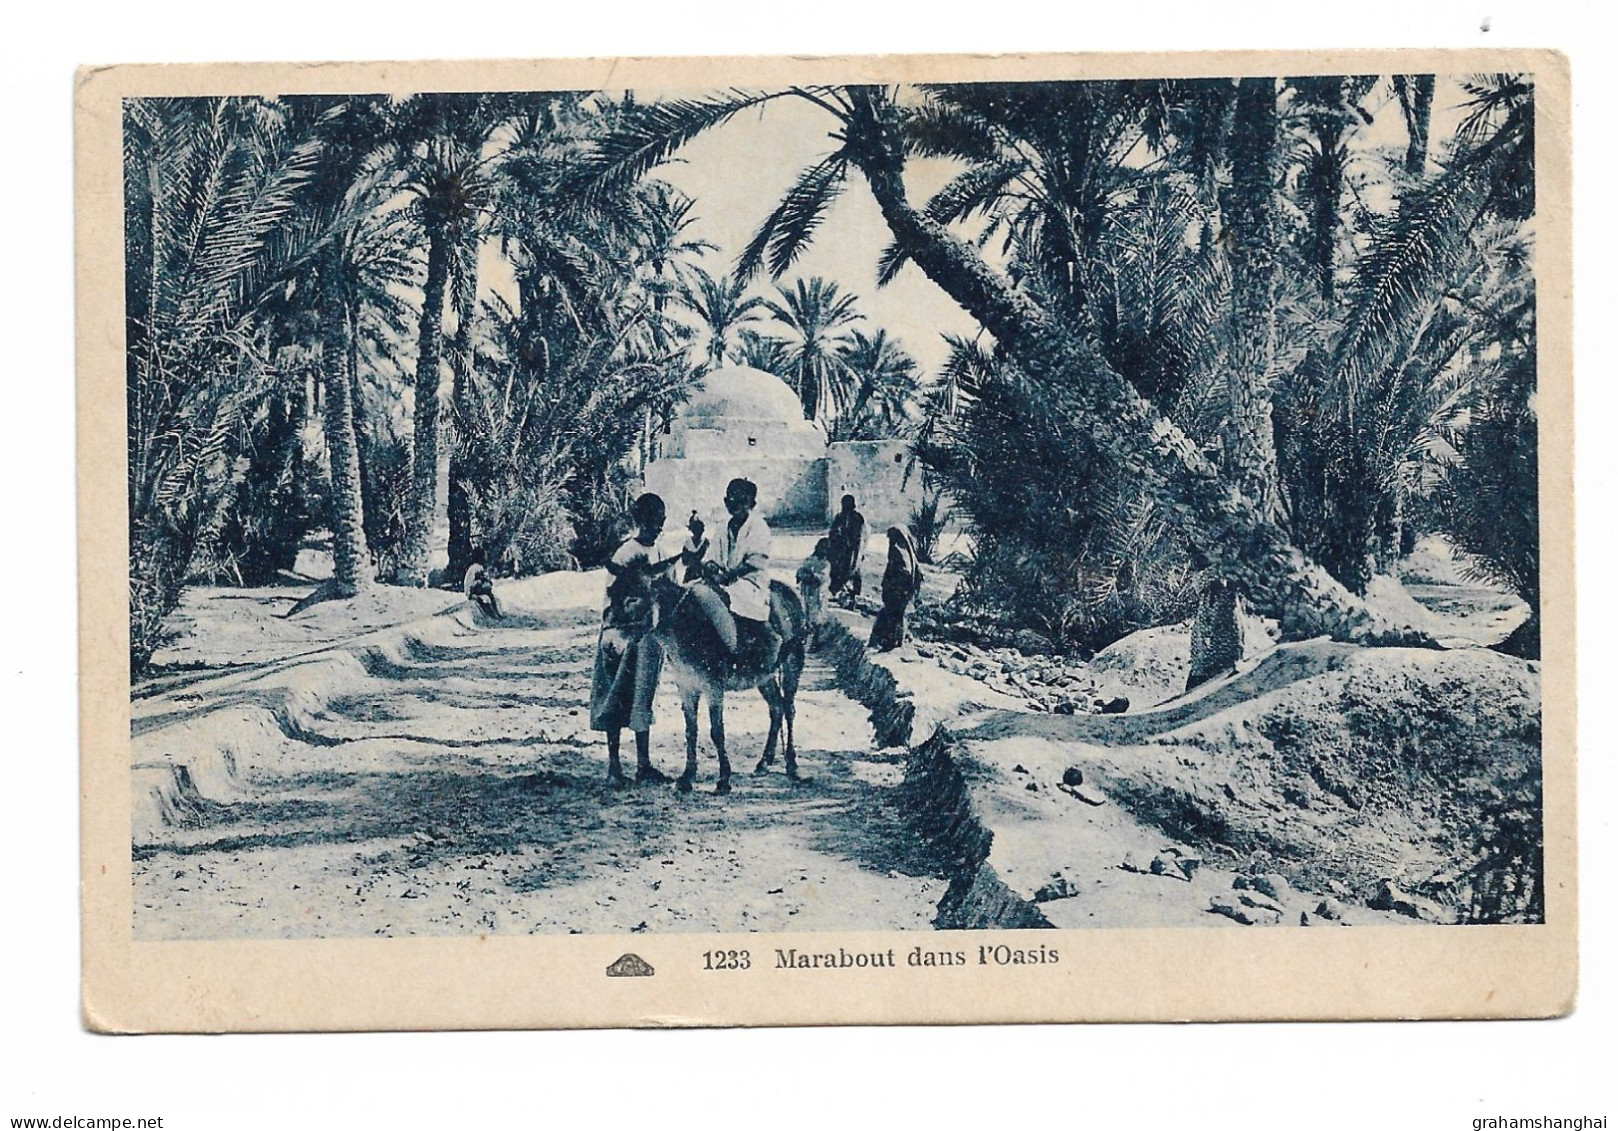 Postcard Tunisia Marabout Dans L'Oasis 1943 British Army Field Post Office FPO255 1 Infantry Division WW2 Gilbert Lewis - War 1939-45